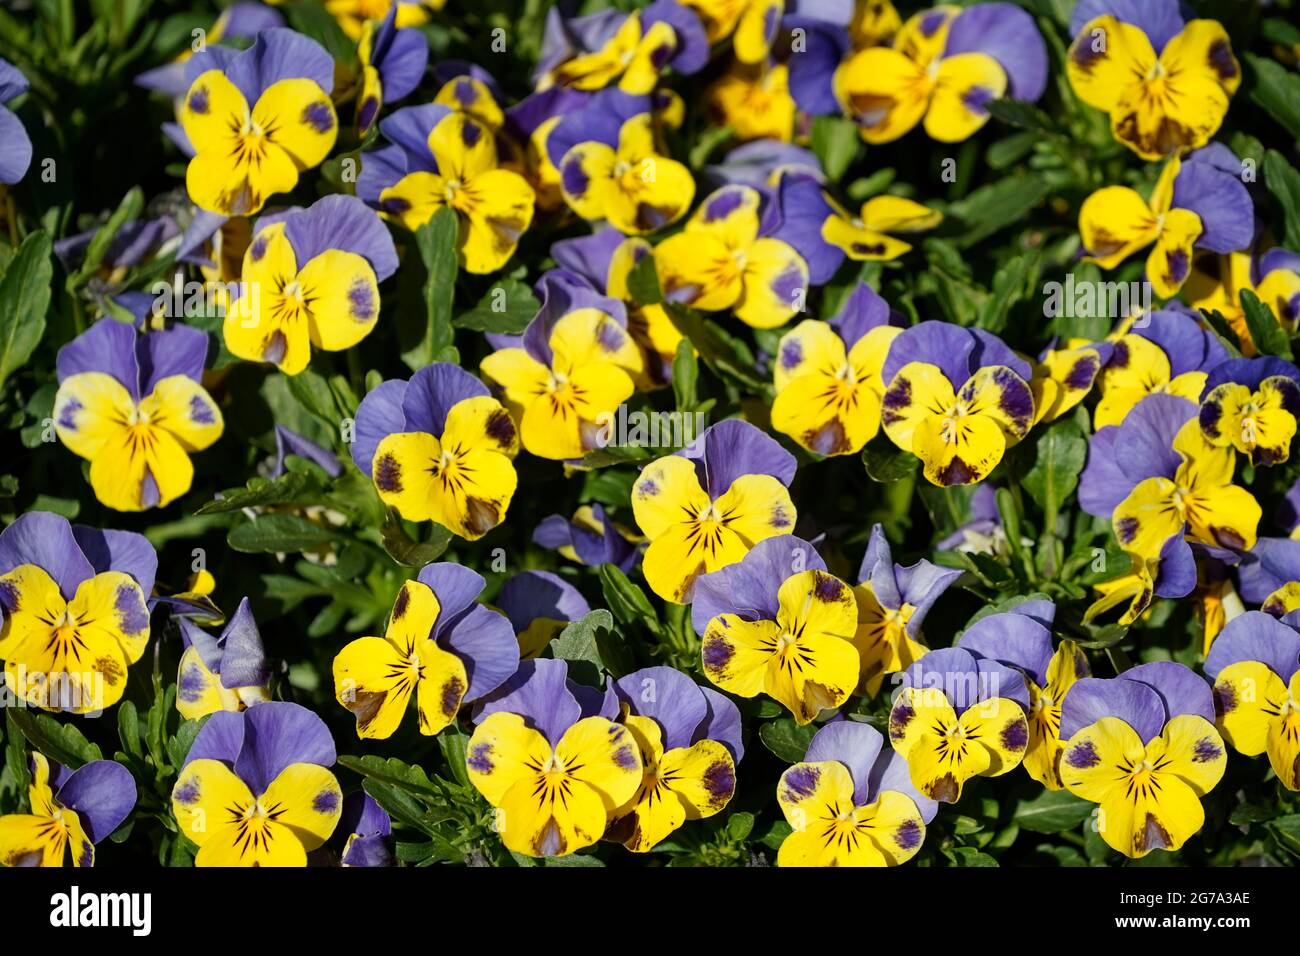 Germany, Bavaria, flowerbed, horned violets, pansies, yellow-blue, screen-filling Stock Photo